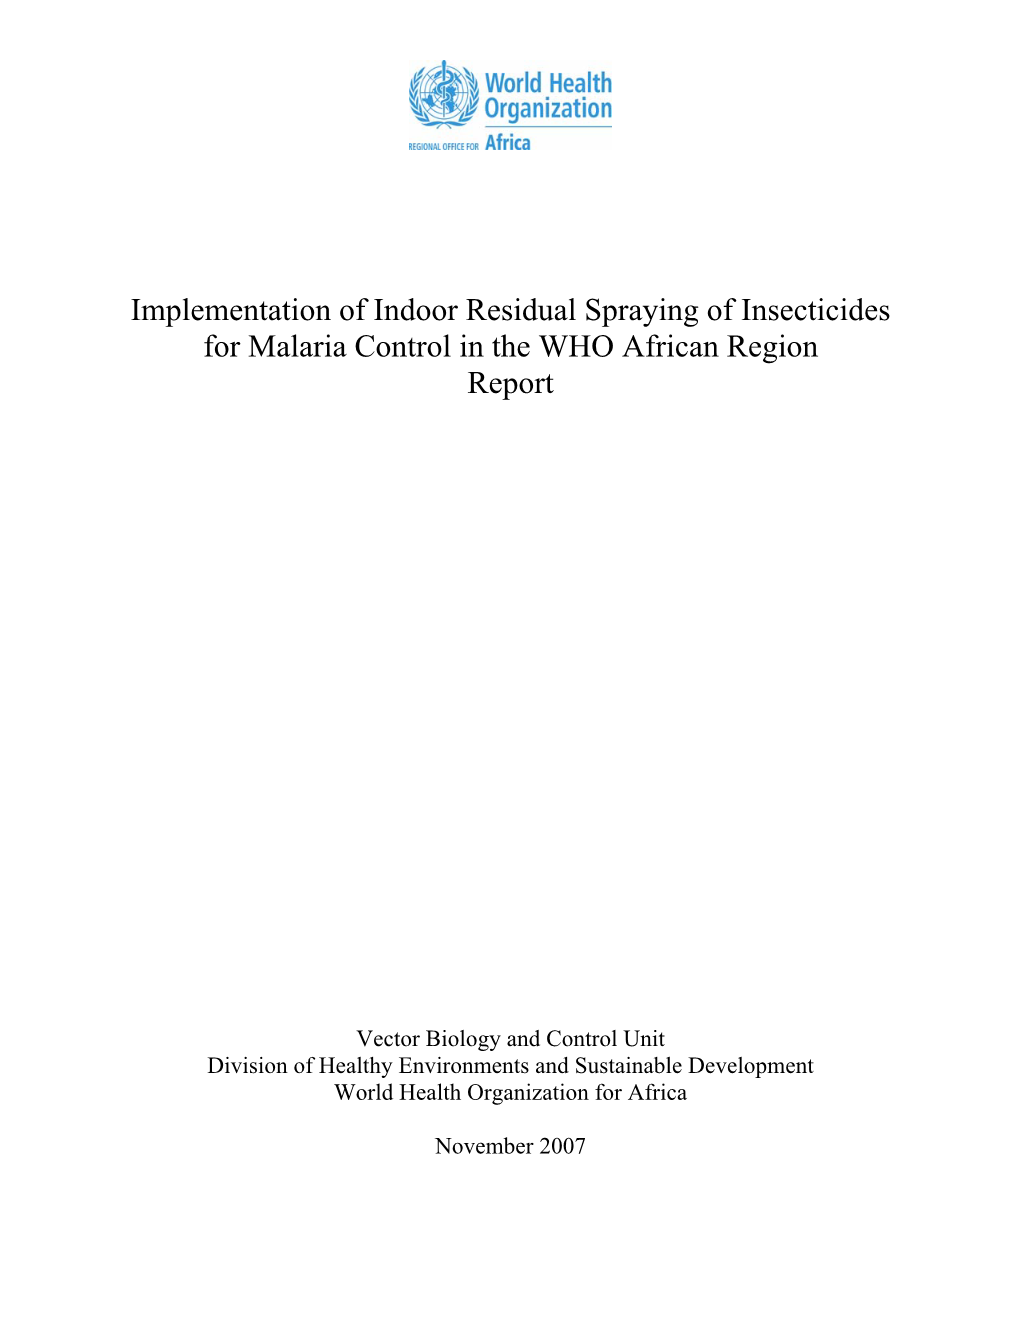 Implementation of Indoor Residual Spraying of Insecticides for Malaria Control in the WHO African Region Report